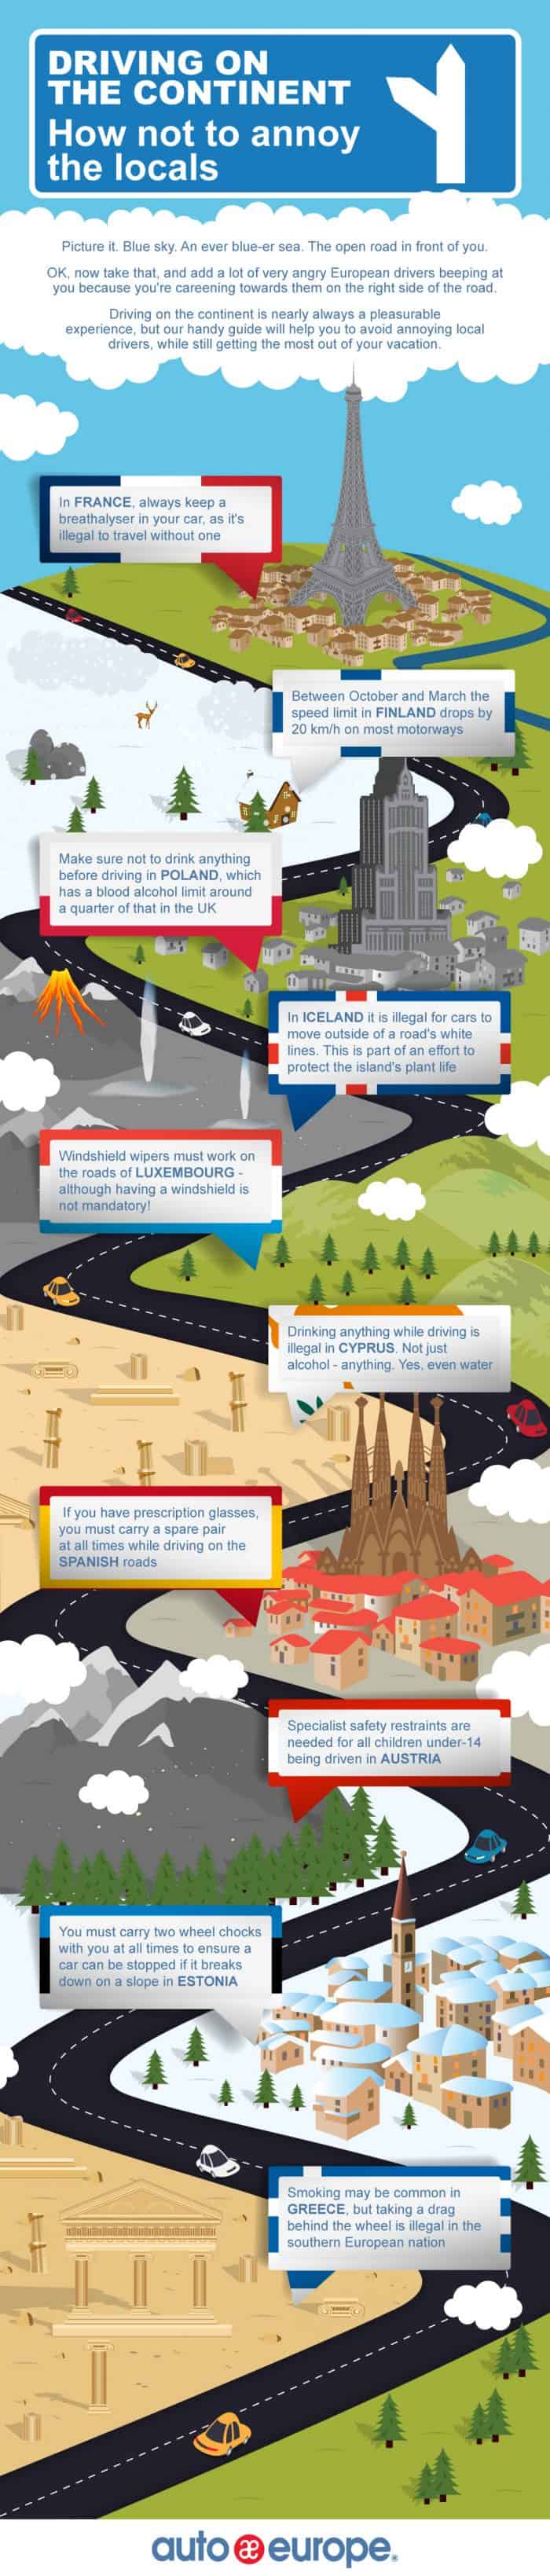 infographic describes european driving laws in finland, poland, cyprus, france and elsewhere